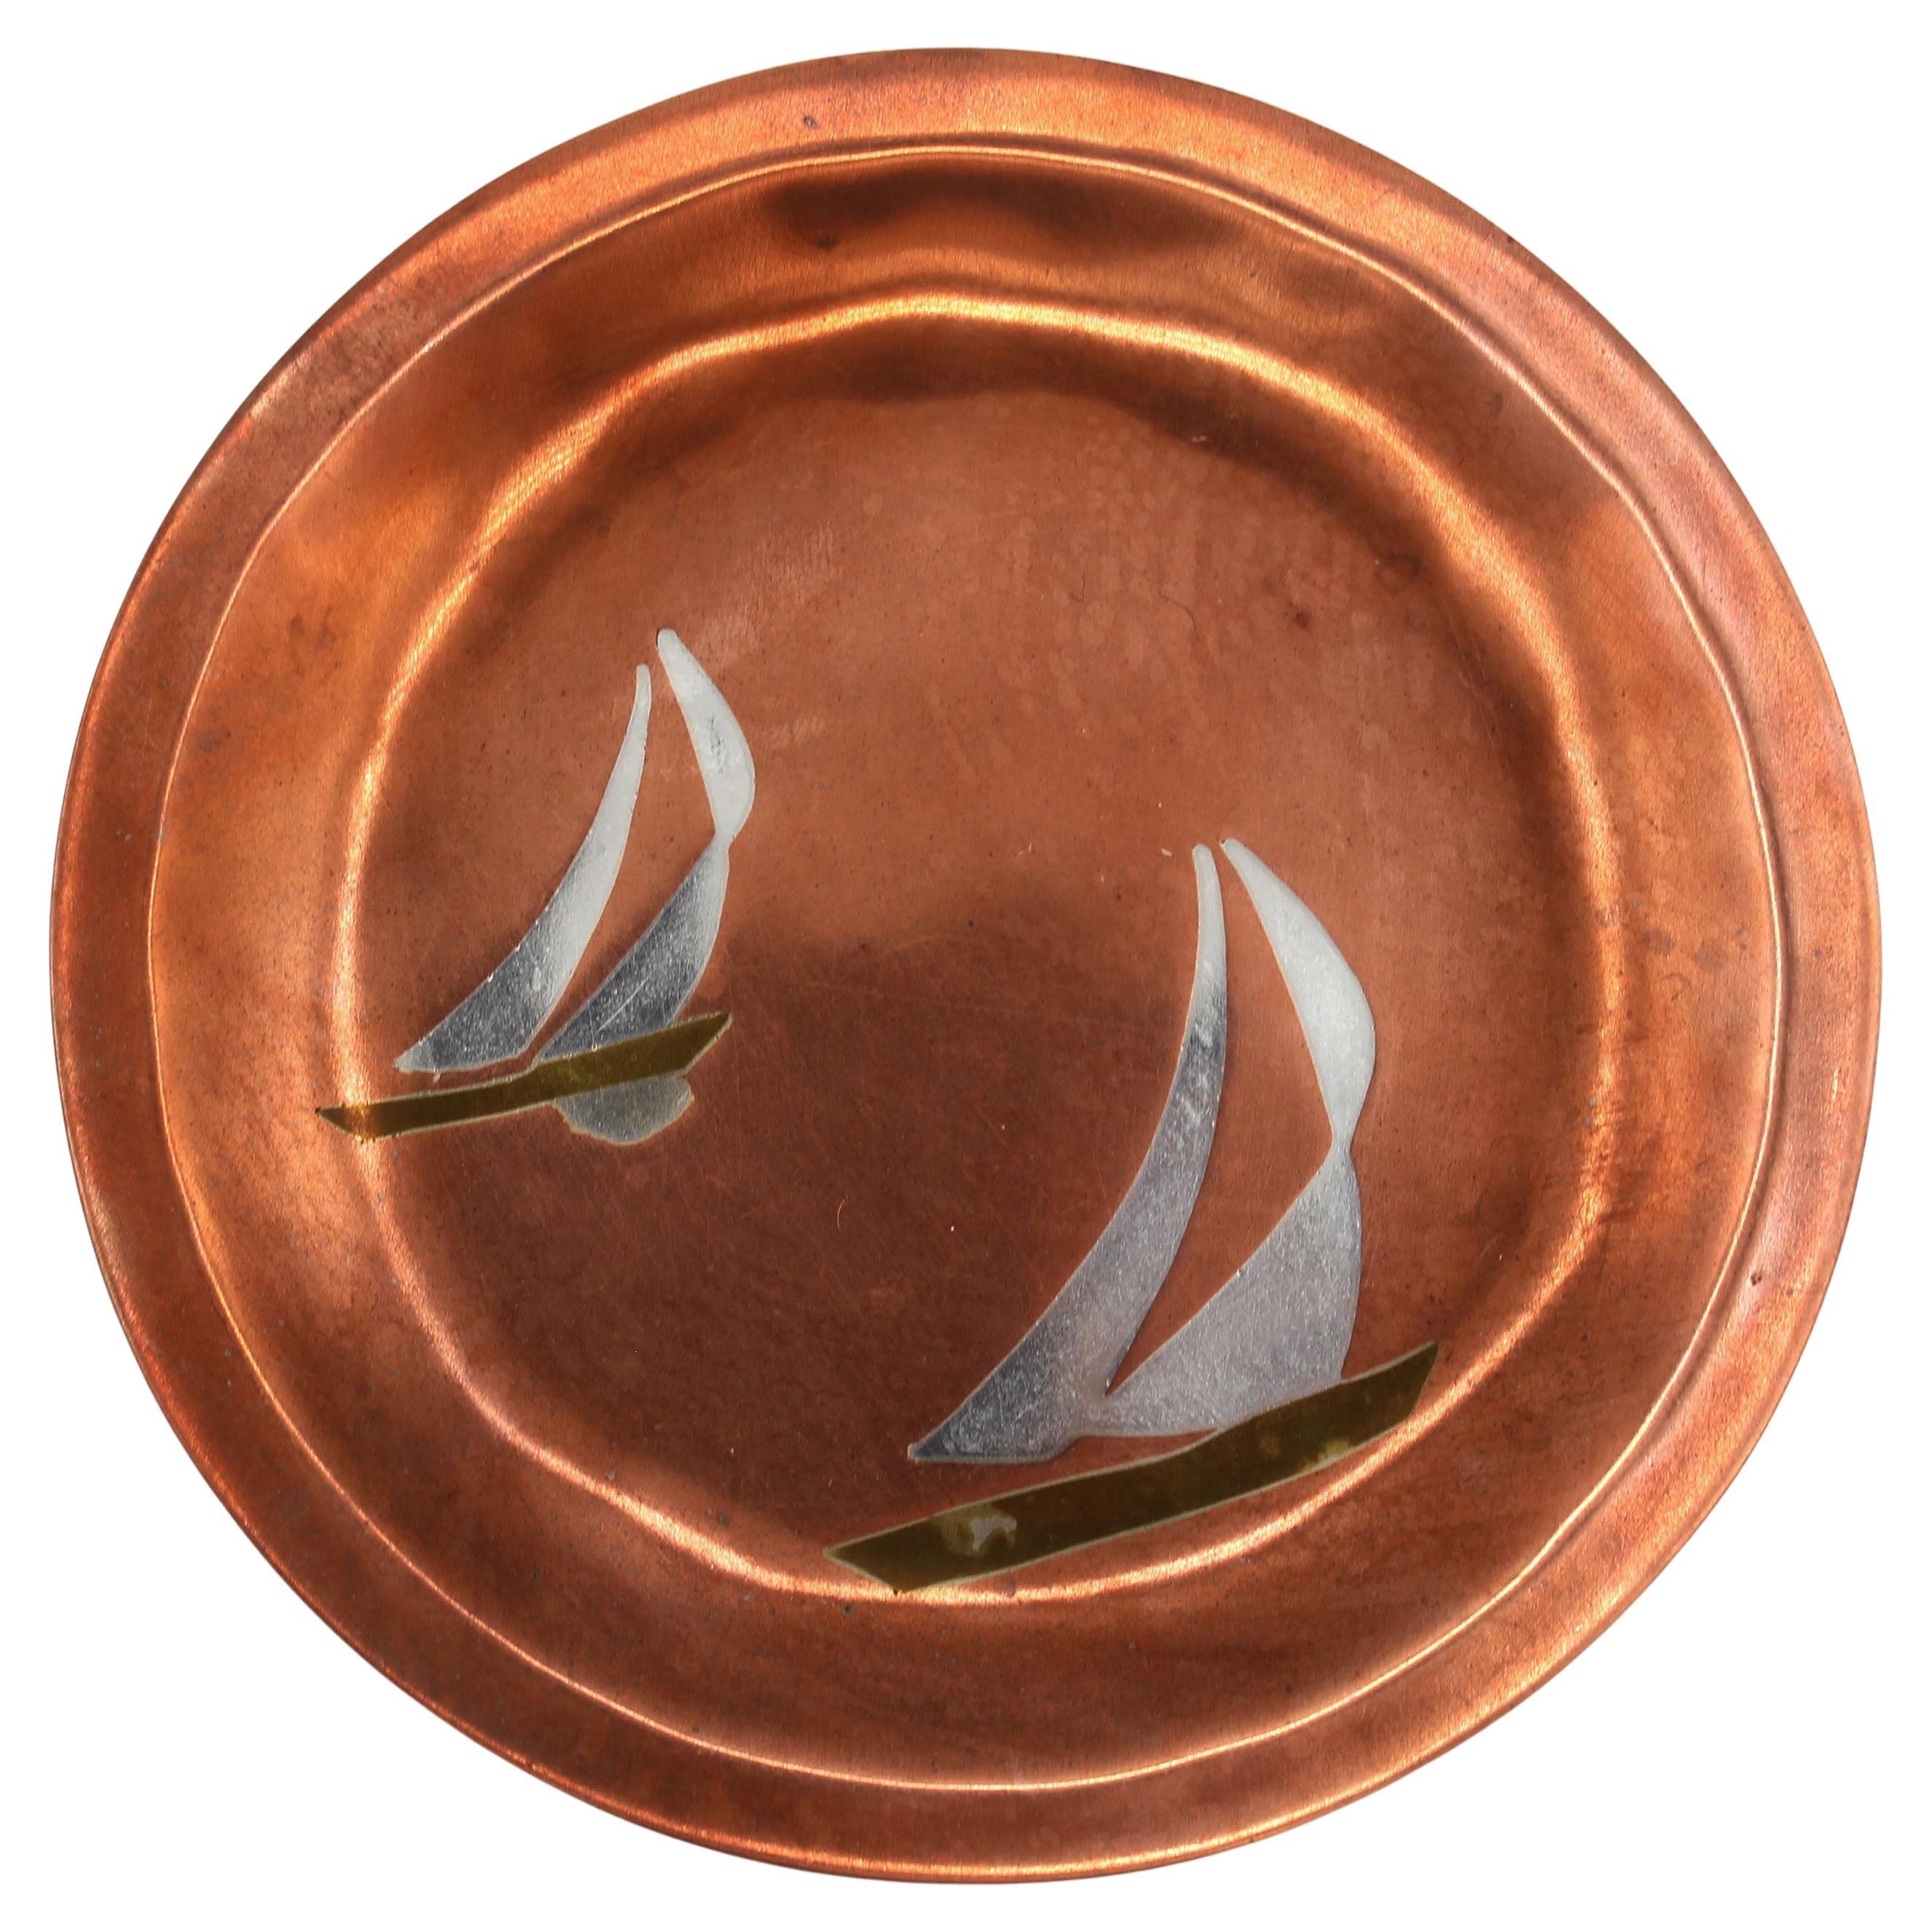 Calling Card Tray Featuring Racing Yachts, circa 1950s by Los Costillo, Taxco